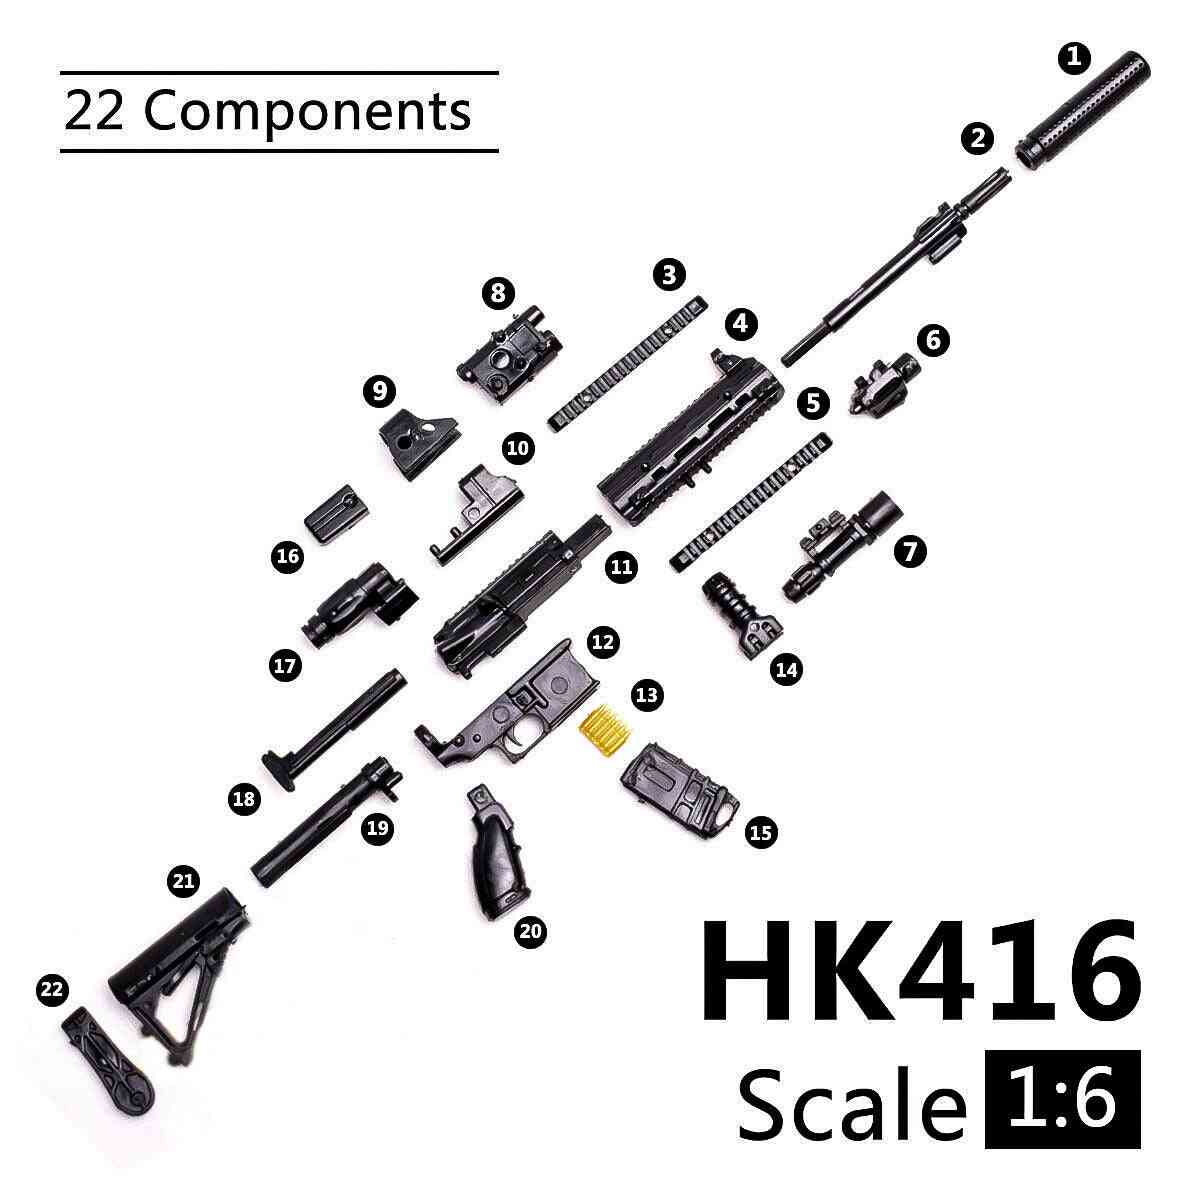 Rifle Assembly Gun Model, Assembling Puzzles, Building Bricks For Action Figure